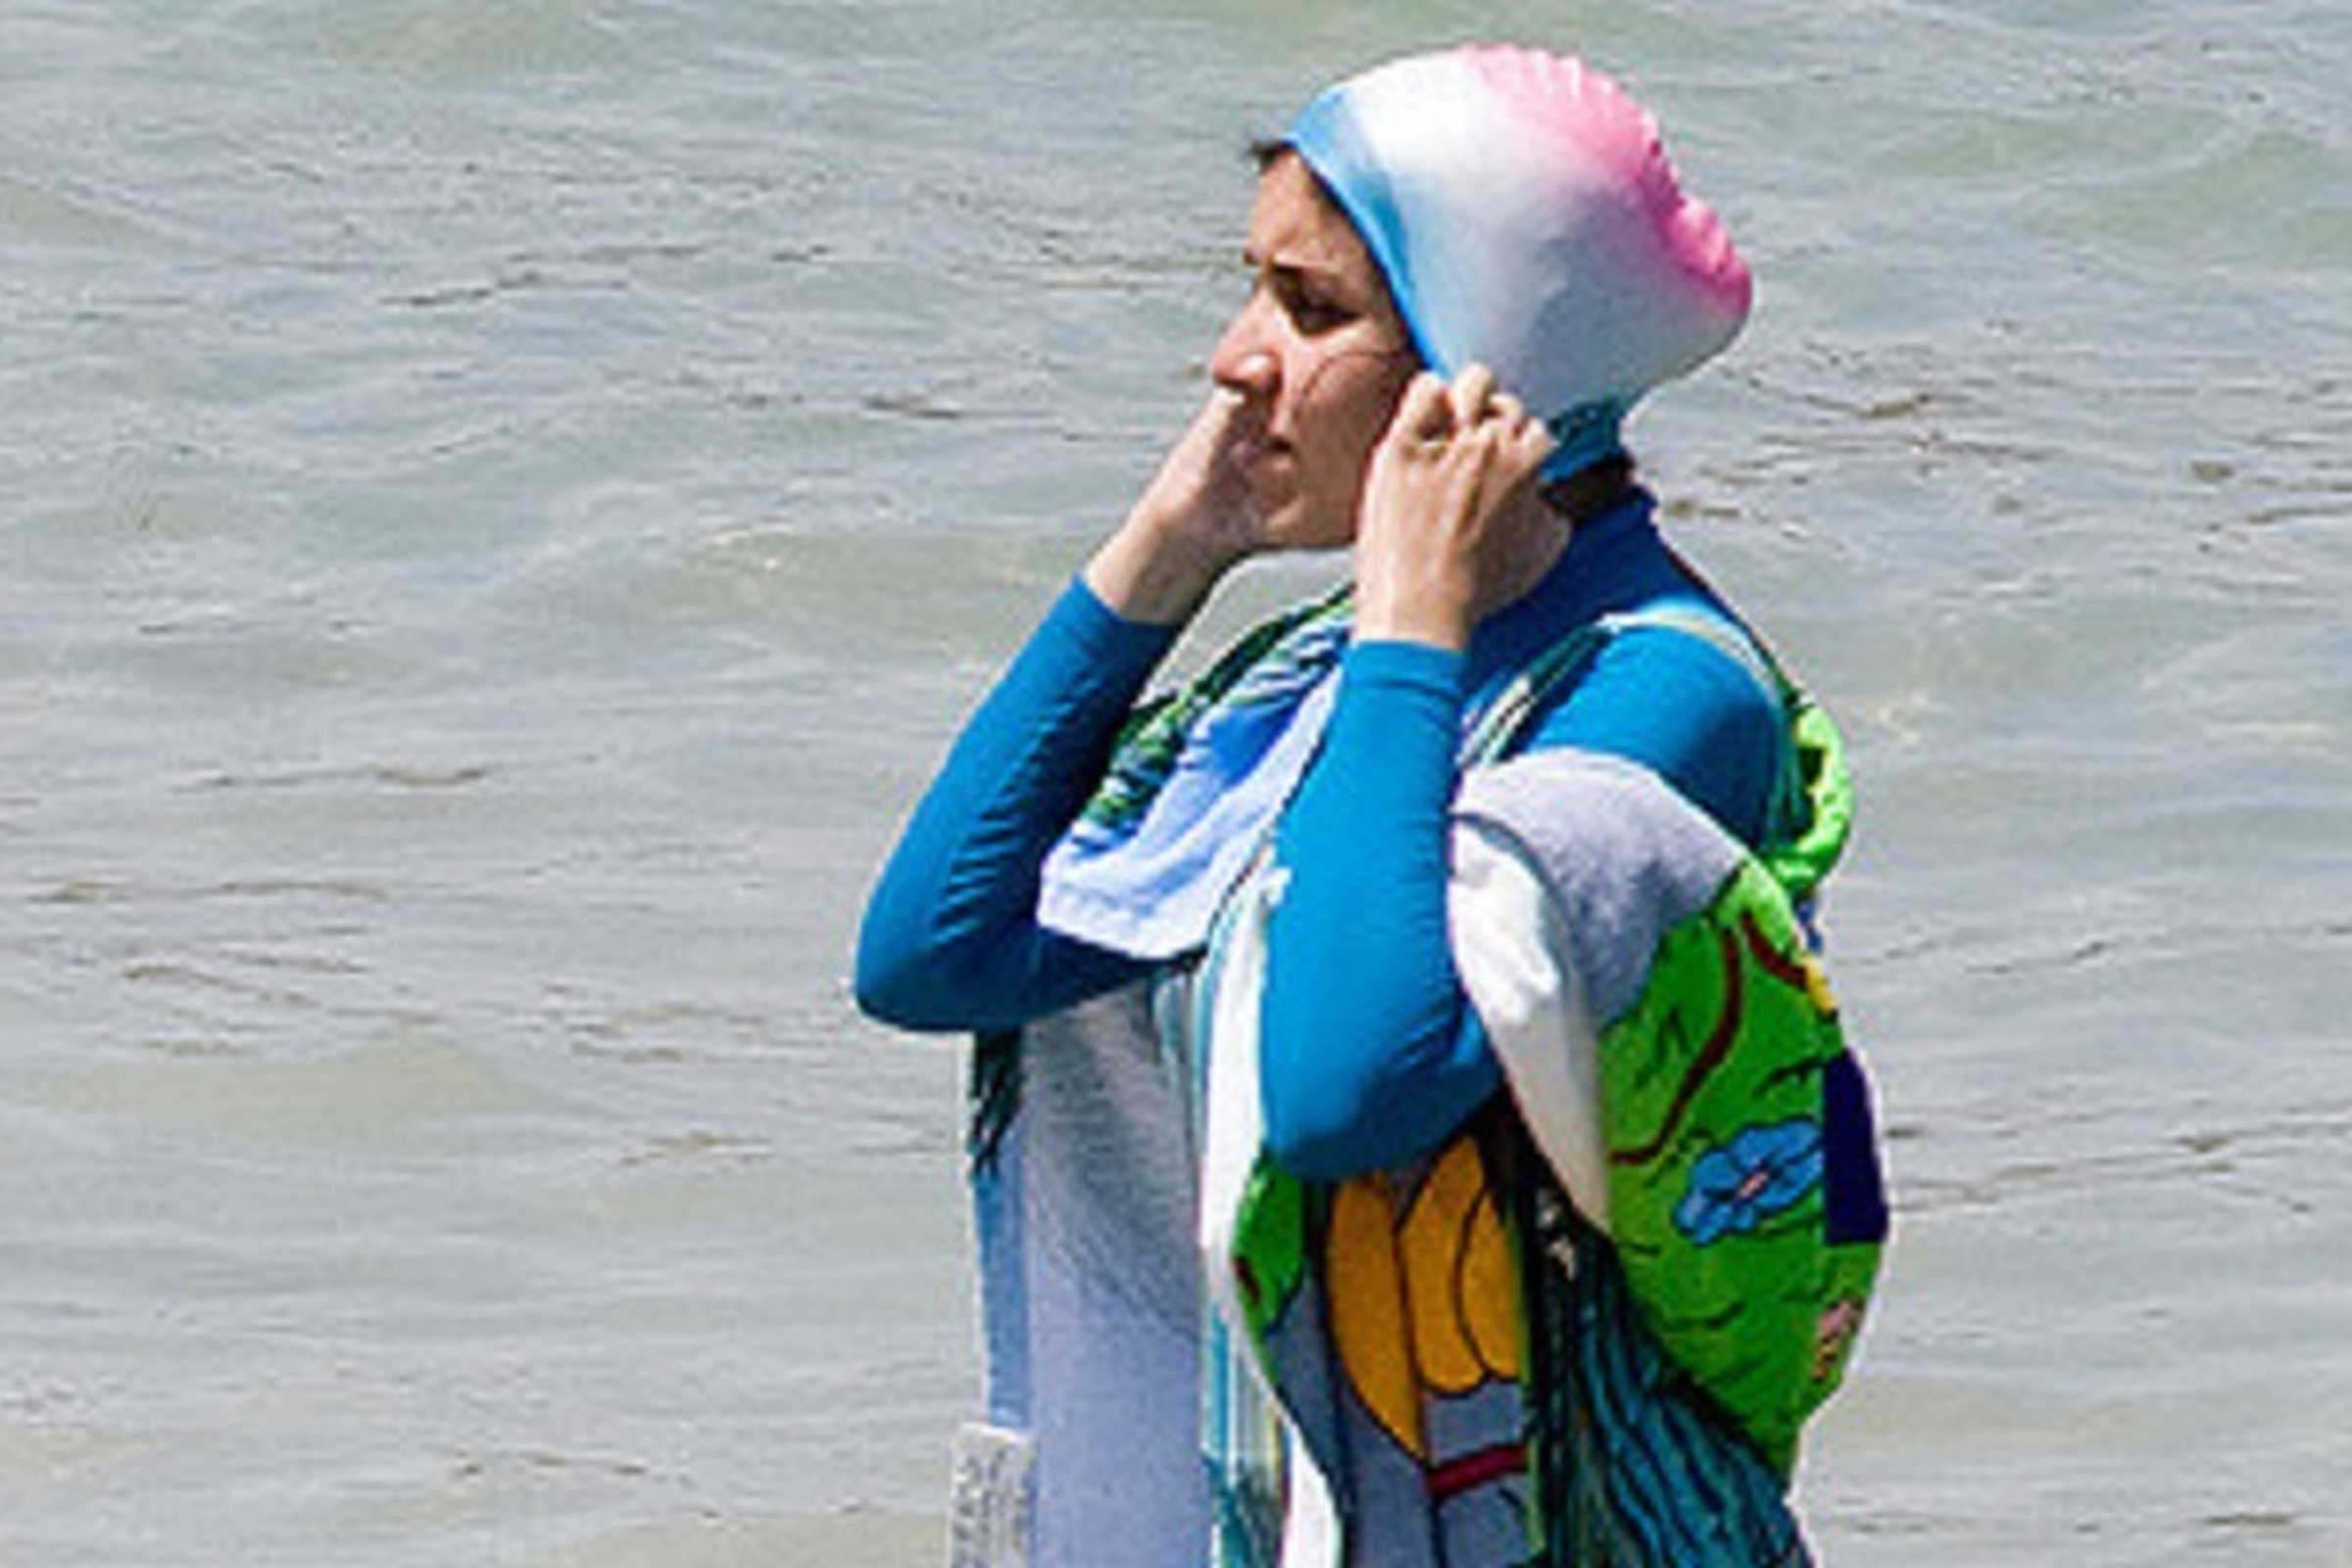 The 'Burkini' ban plays into the hands of ISIS